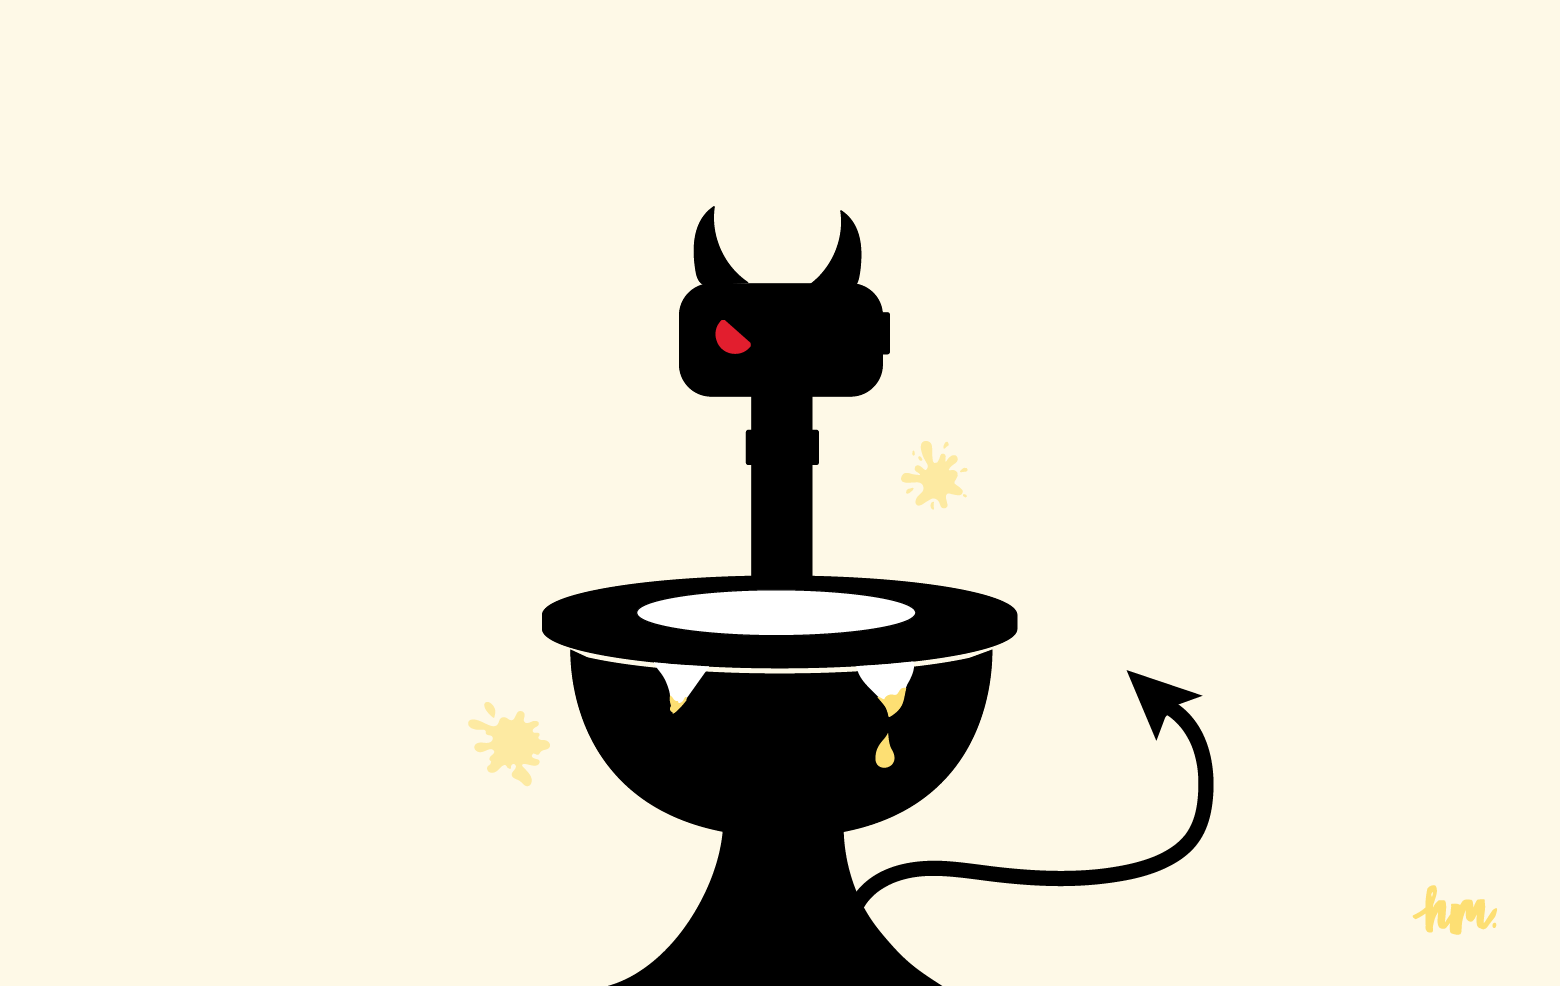 Illustration of a public automatic toilet with a slanted red eye, horns, fangs, and a forked tail.